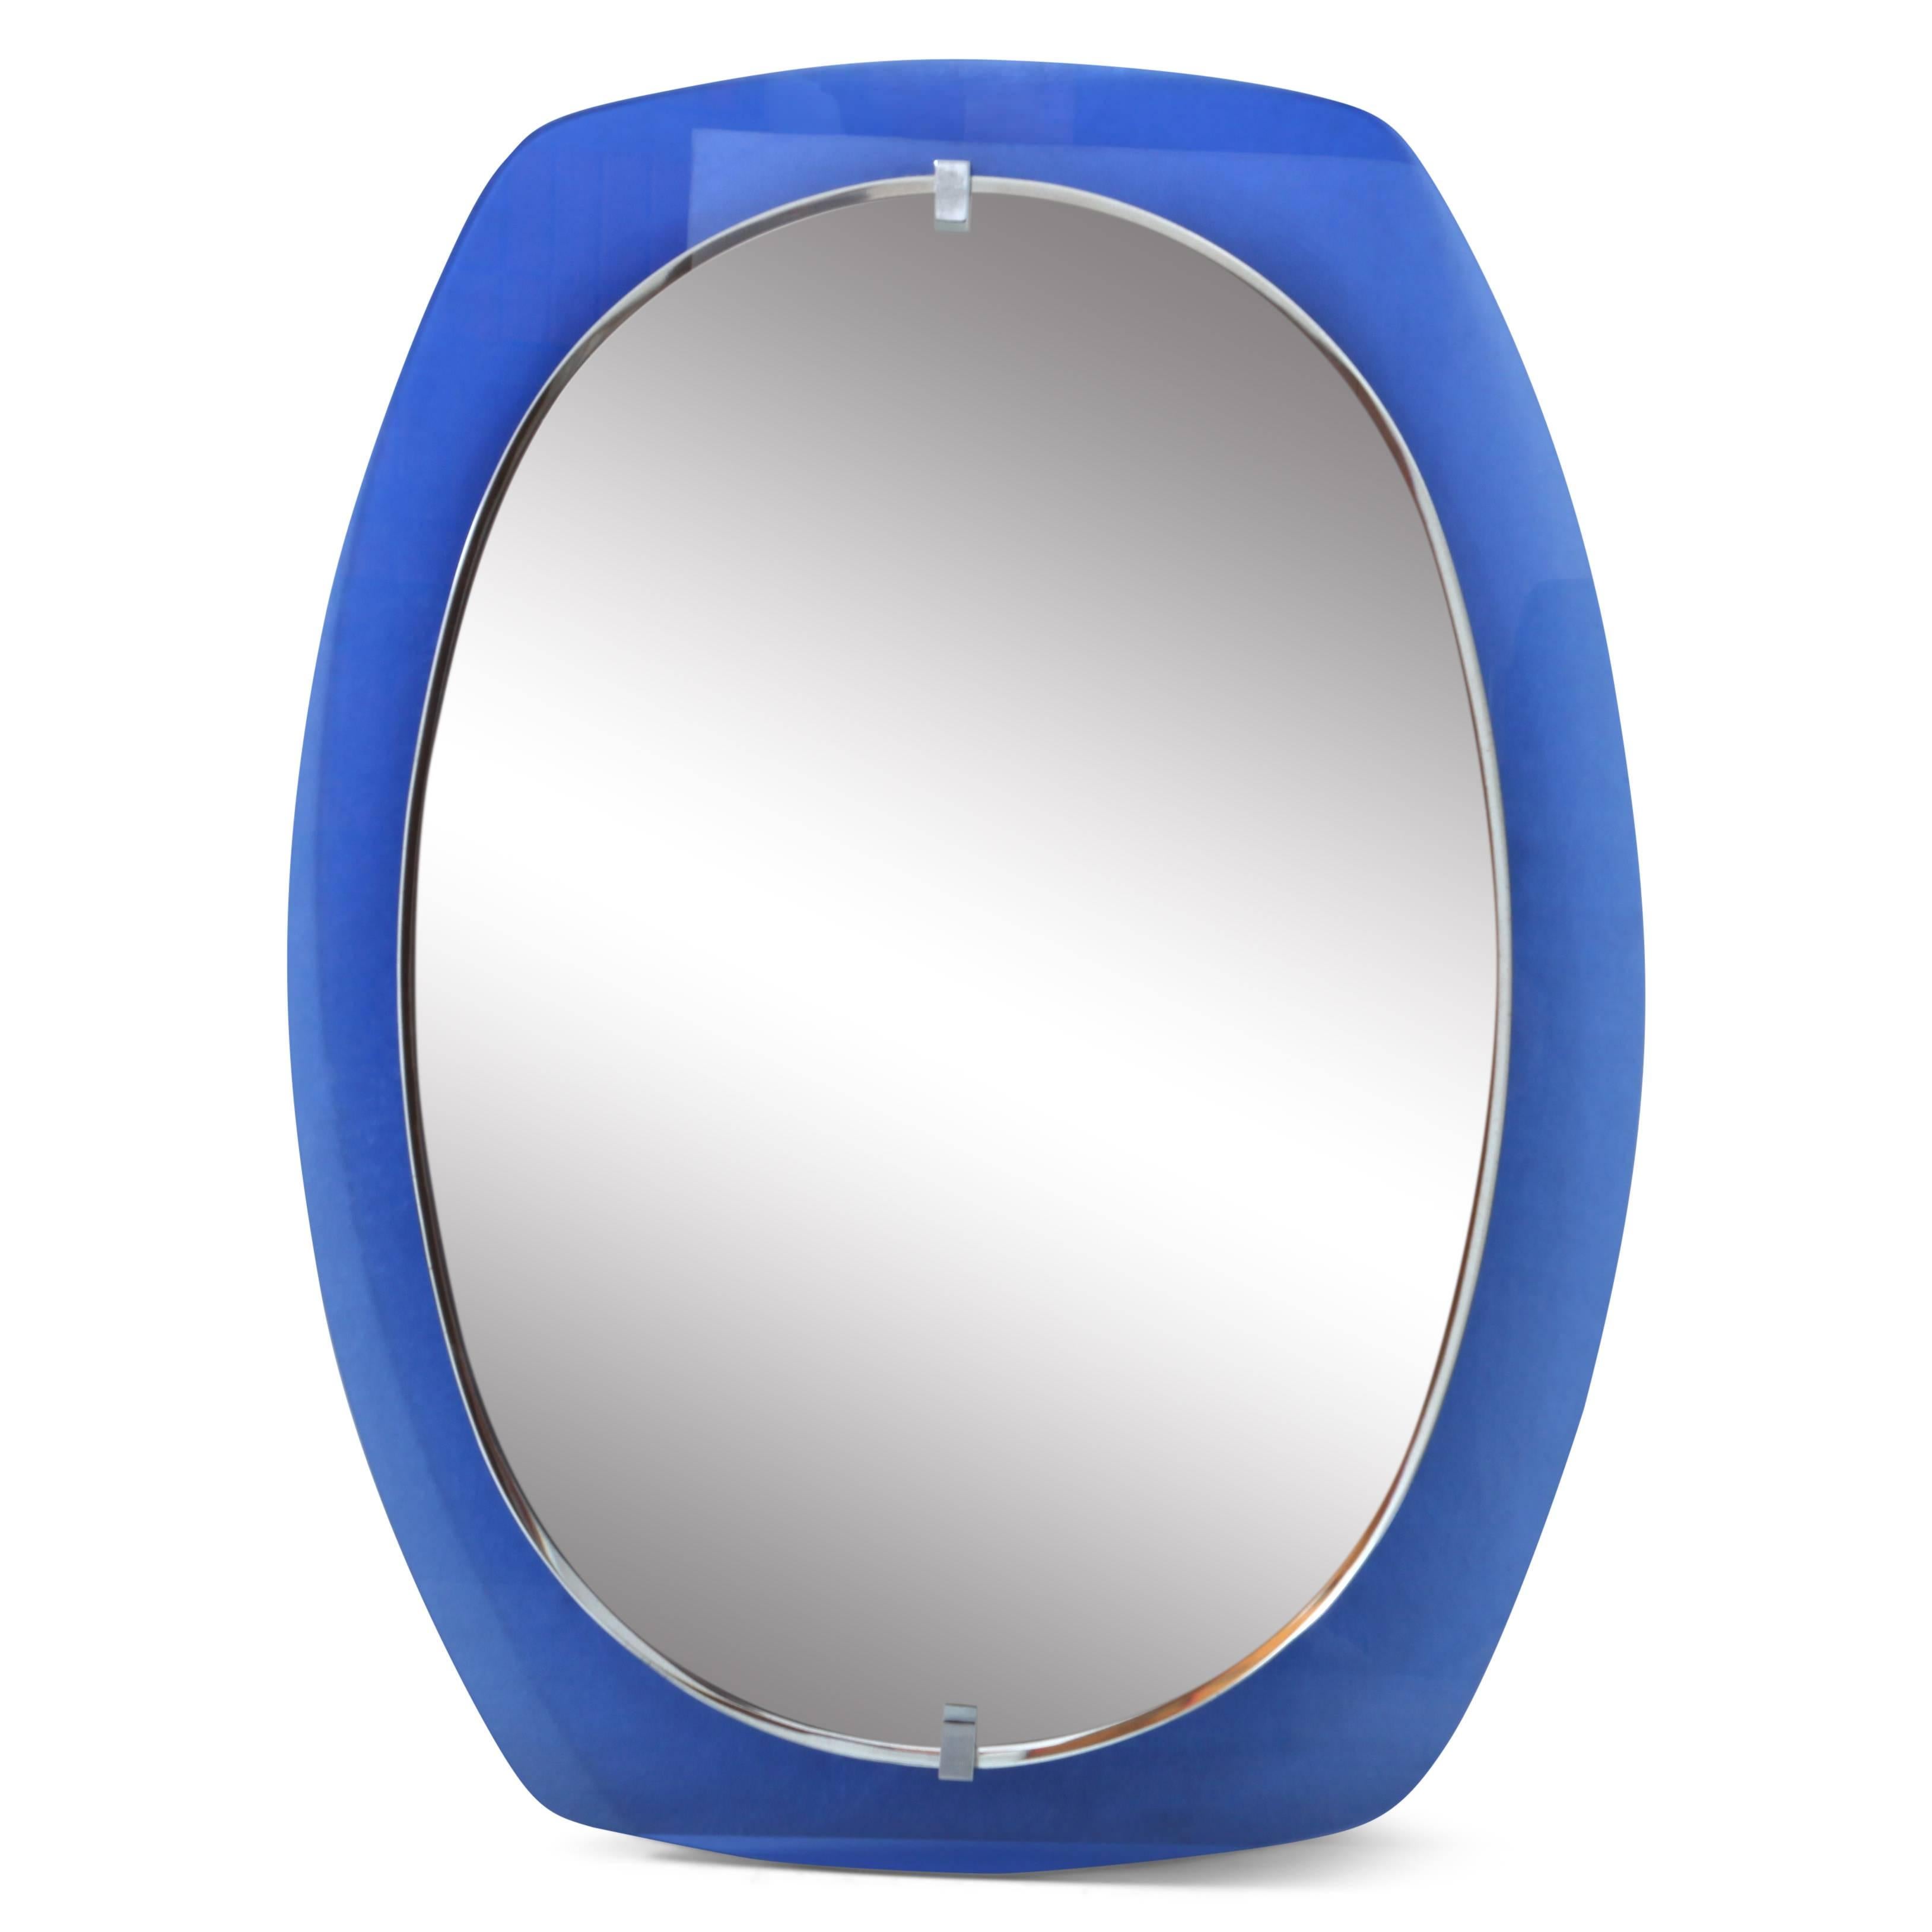 Italian wall mirror with a blue glass frame and an oval mirror pane by Veca.